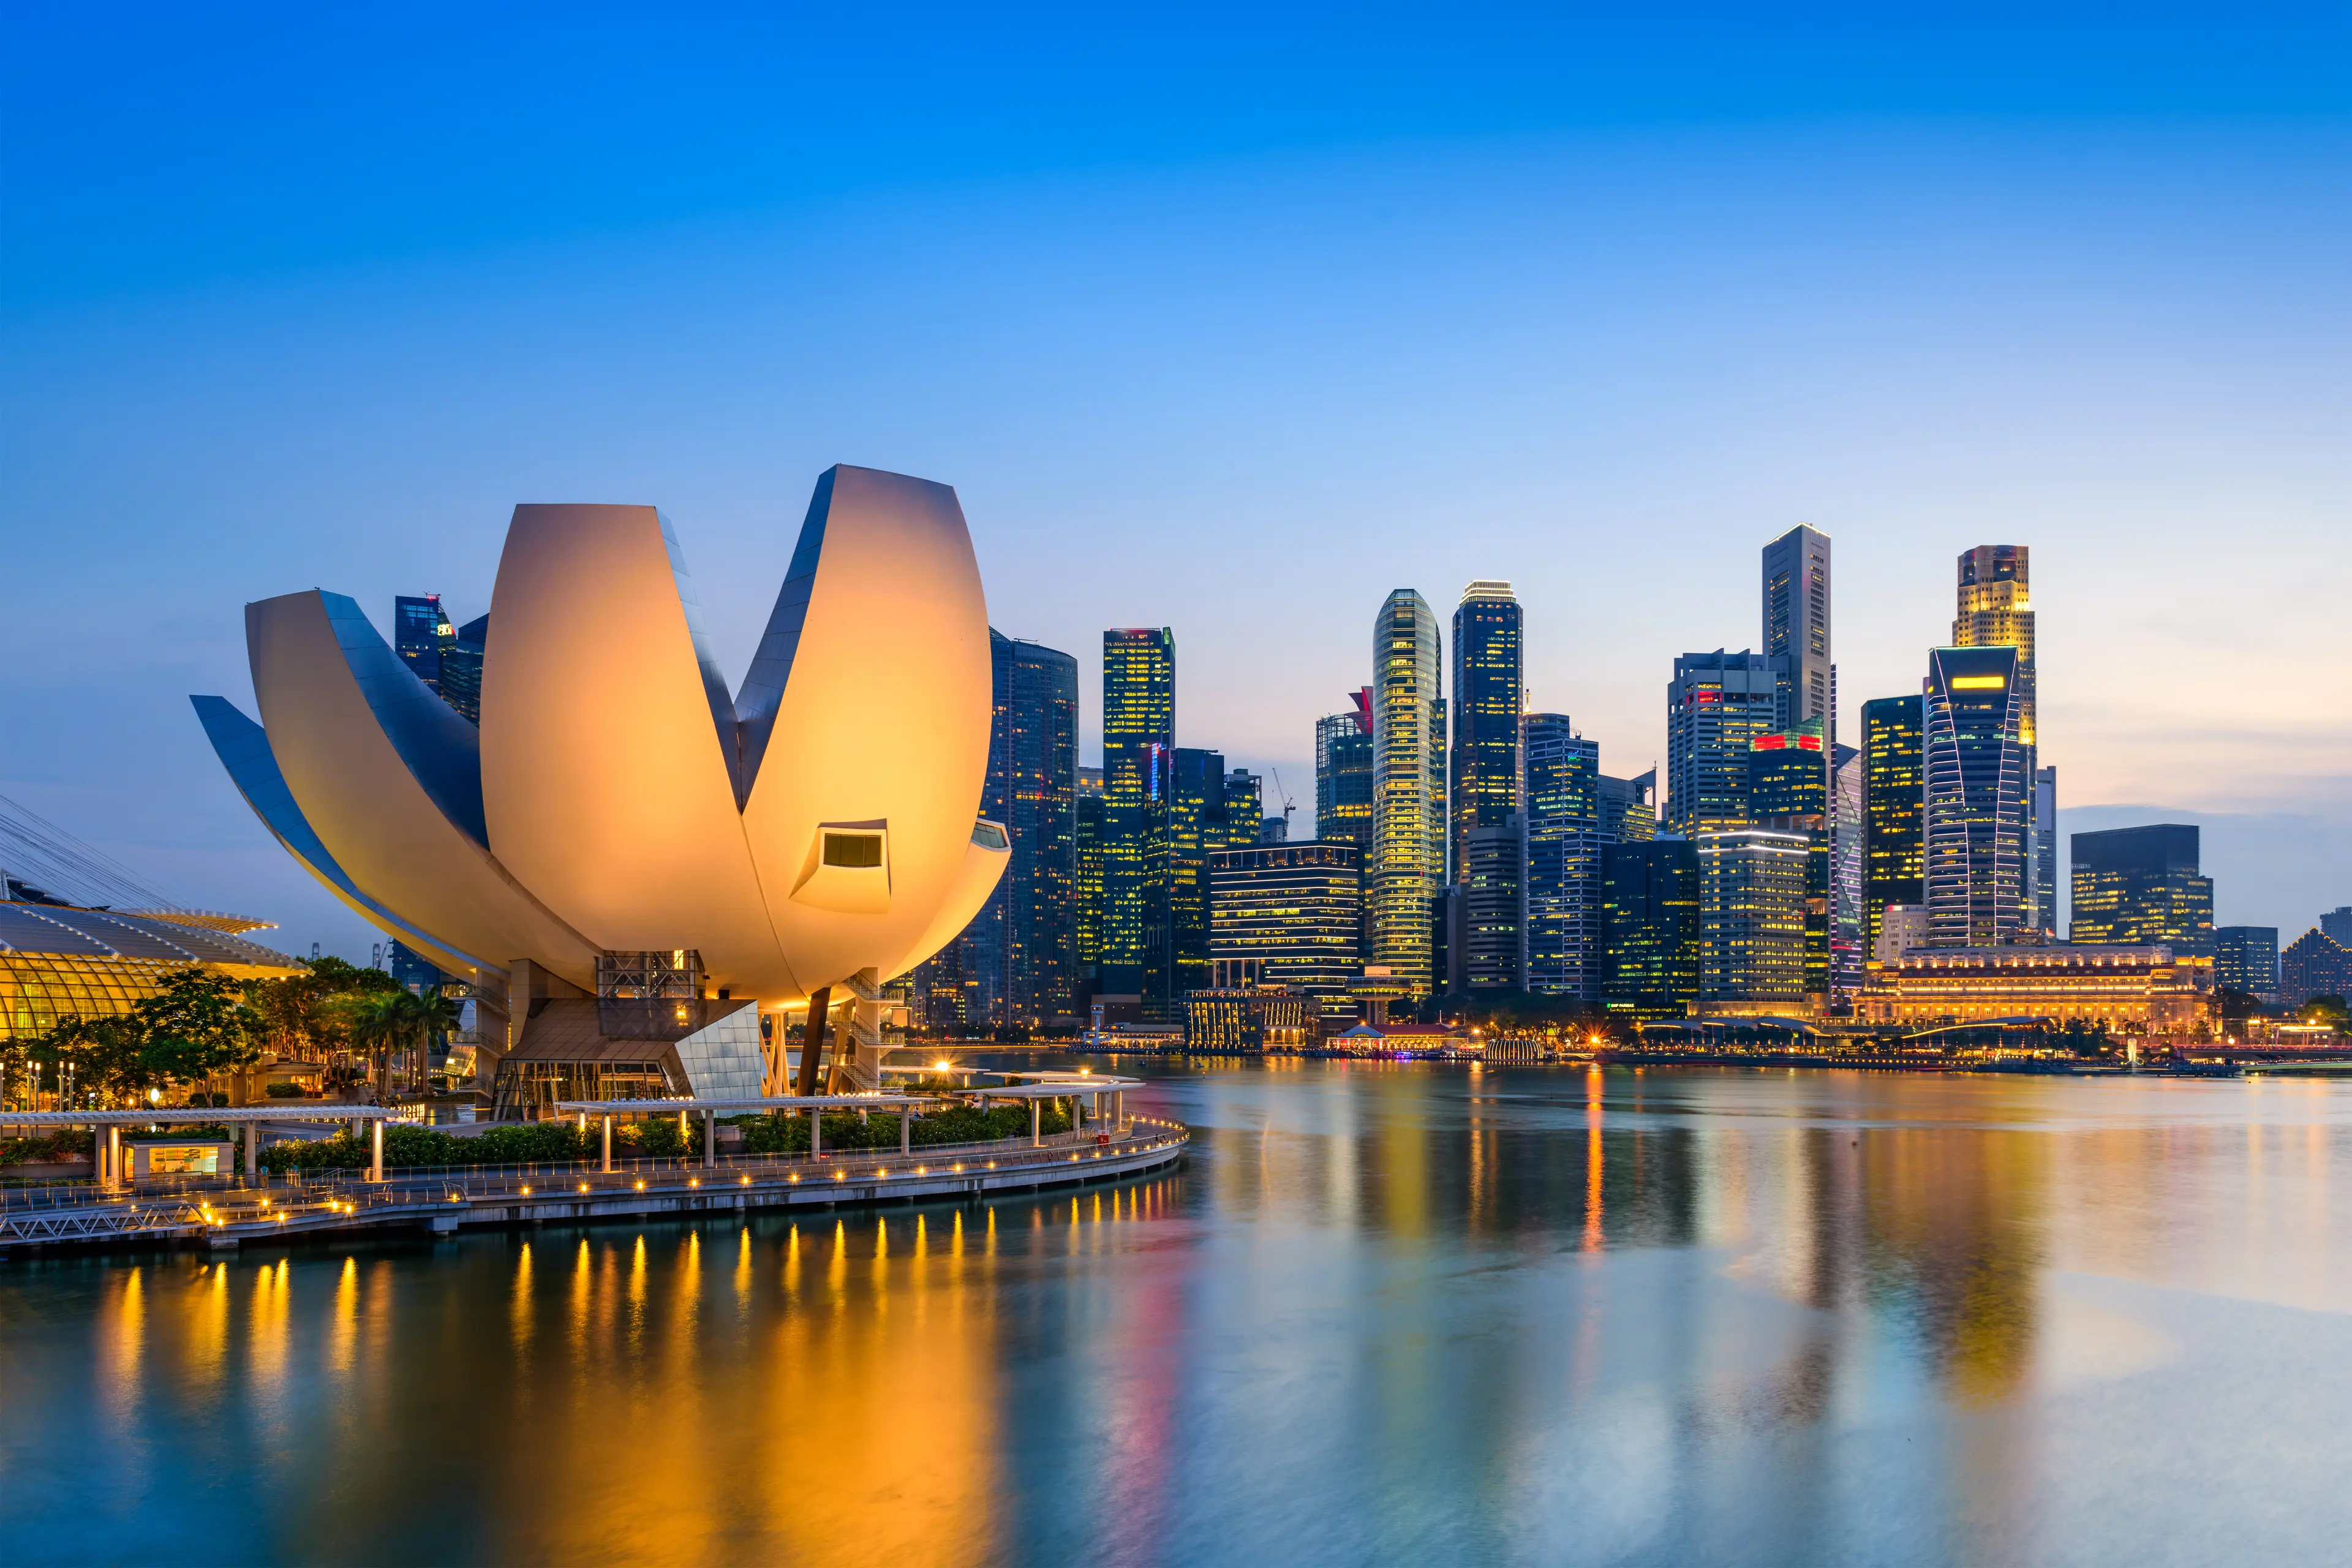 1-Day Local Singapore Itinerary: Family Sightseeing & Shopping Adventure